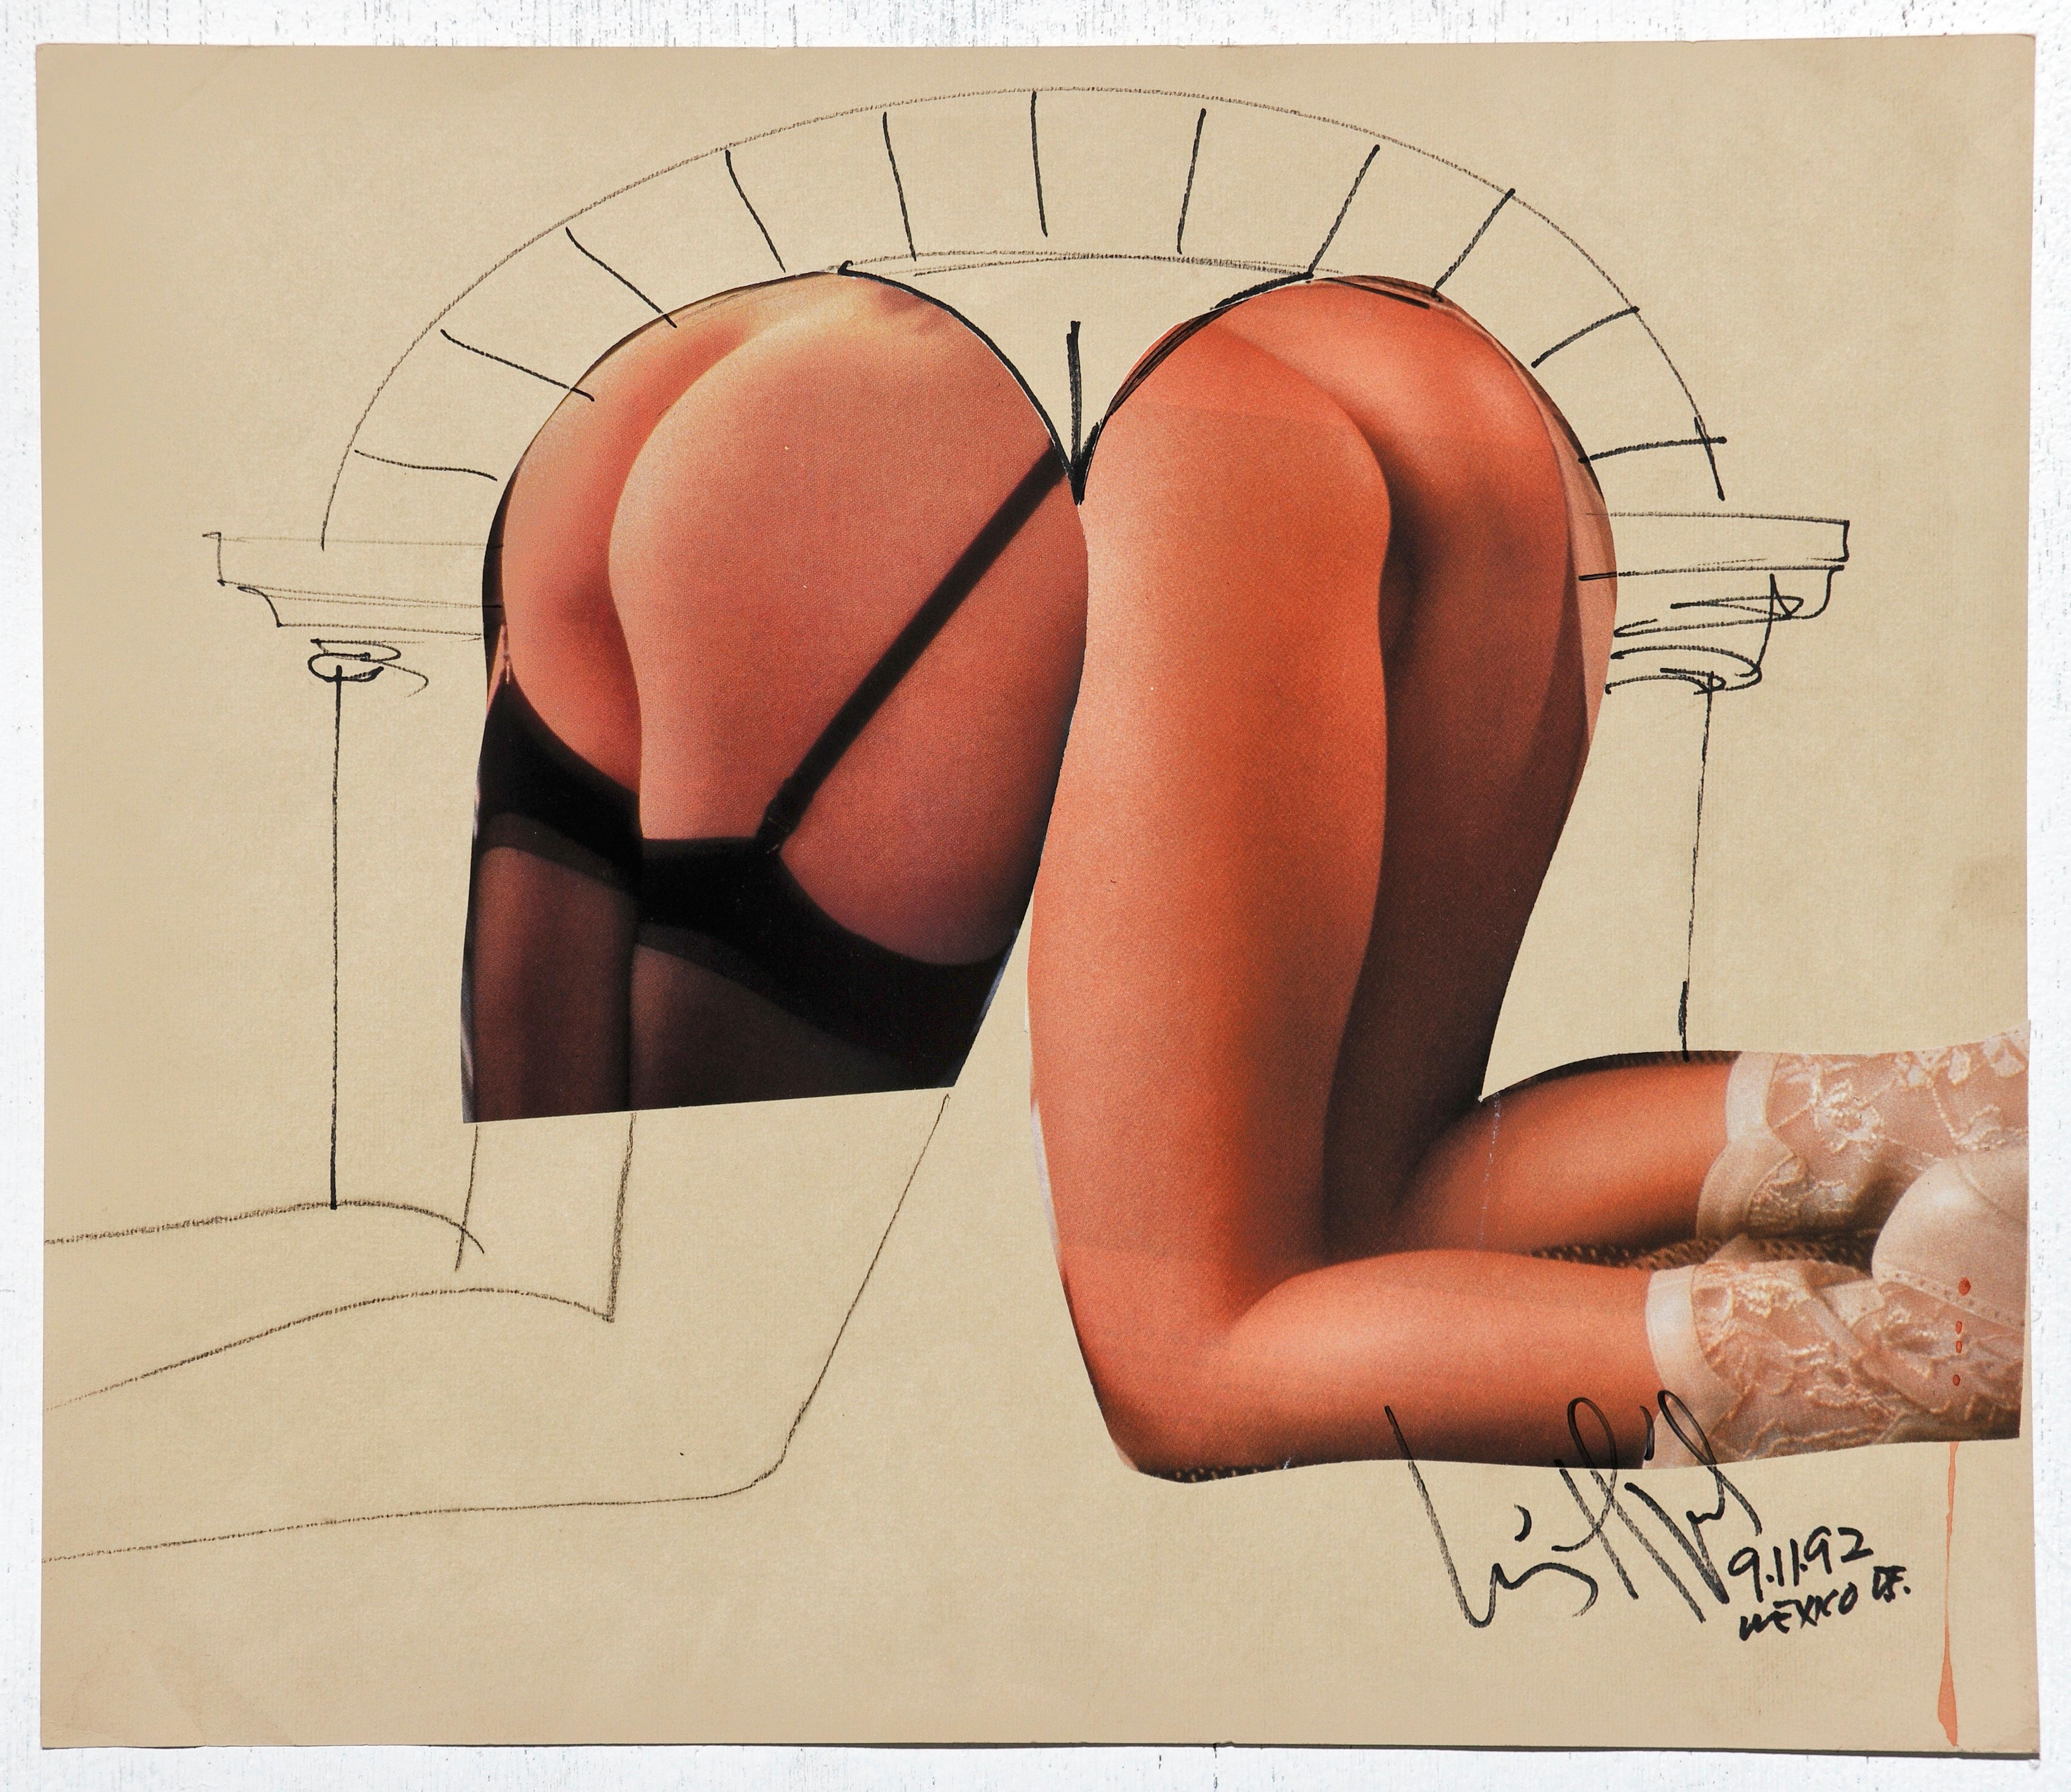 Luis Miguel Valdes, ¨Collage IV¨, 1992, Work on paper, 11.8x13.8 in For Sale 1